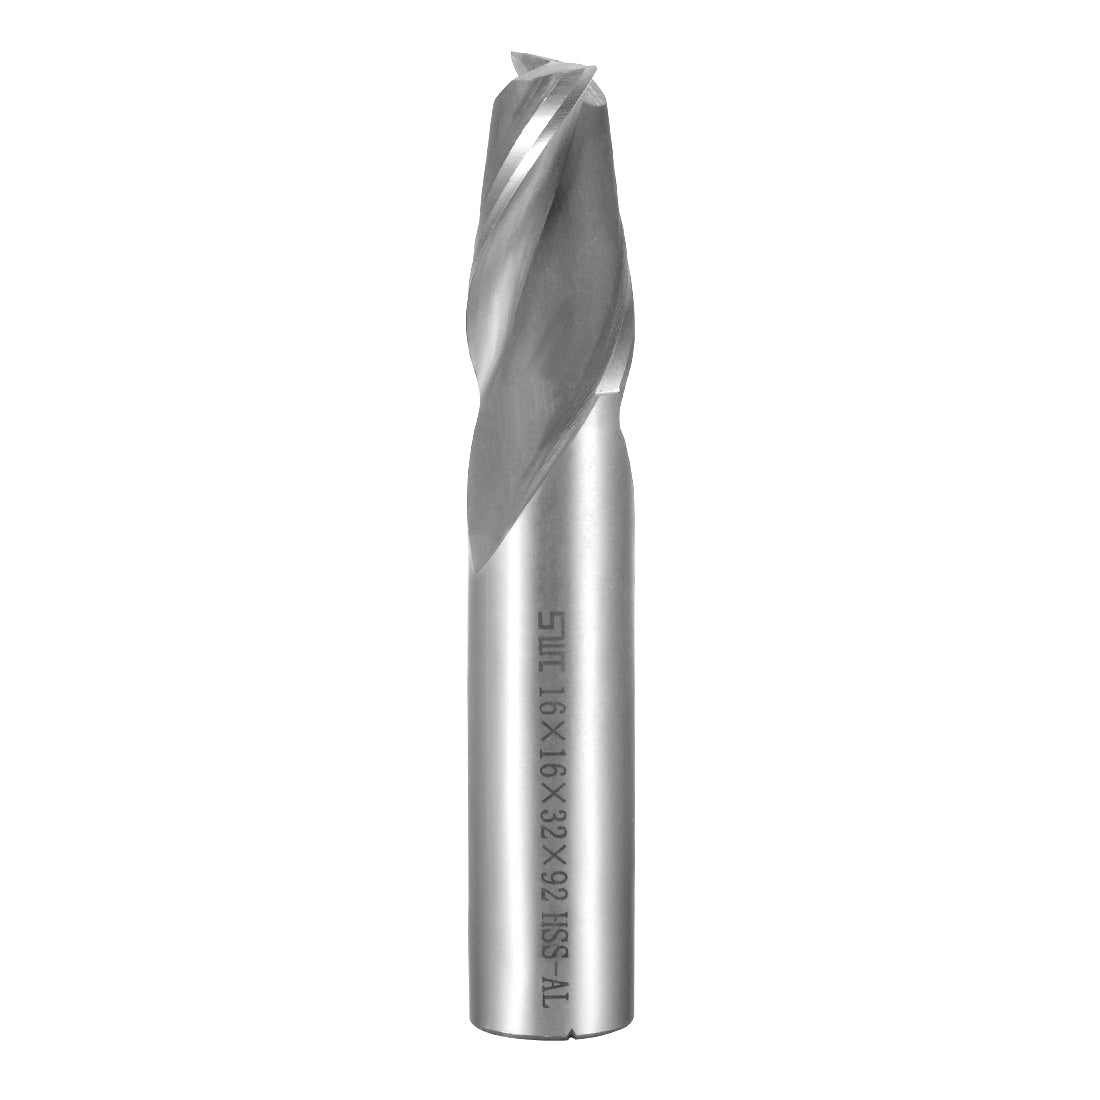 uxcell Uxcell High Speed Steel HSS-AL 2 Flute Straight End Mill Cutter CNC Router Bits